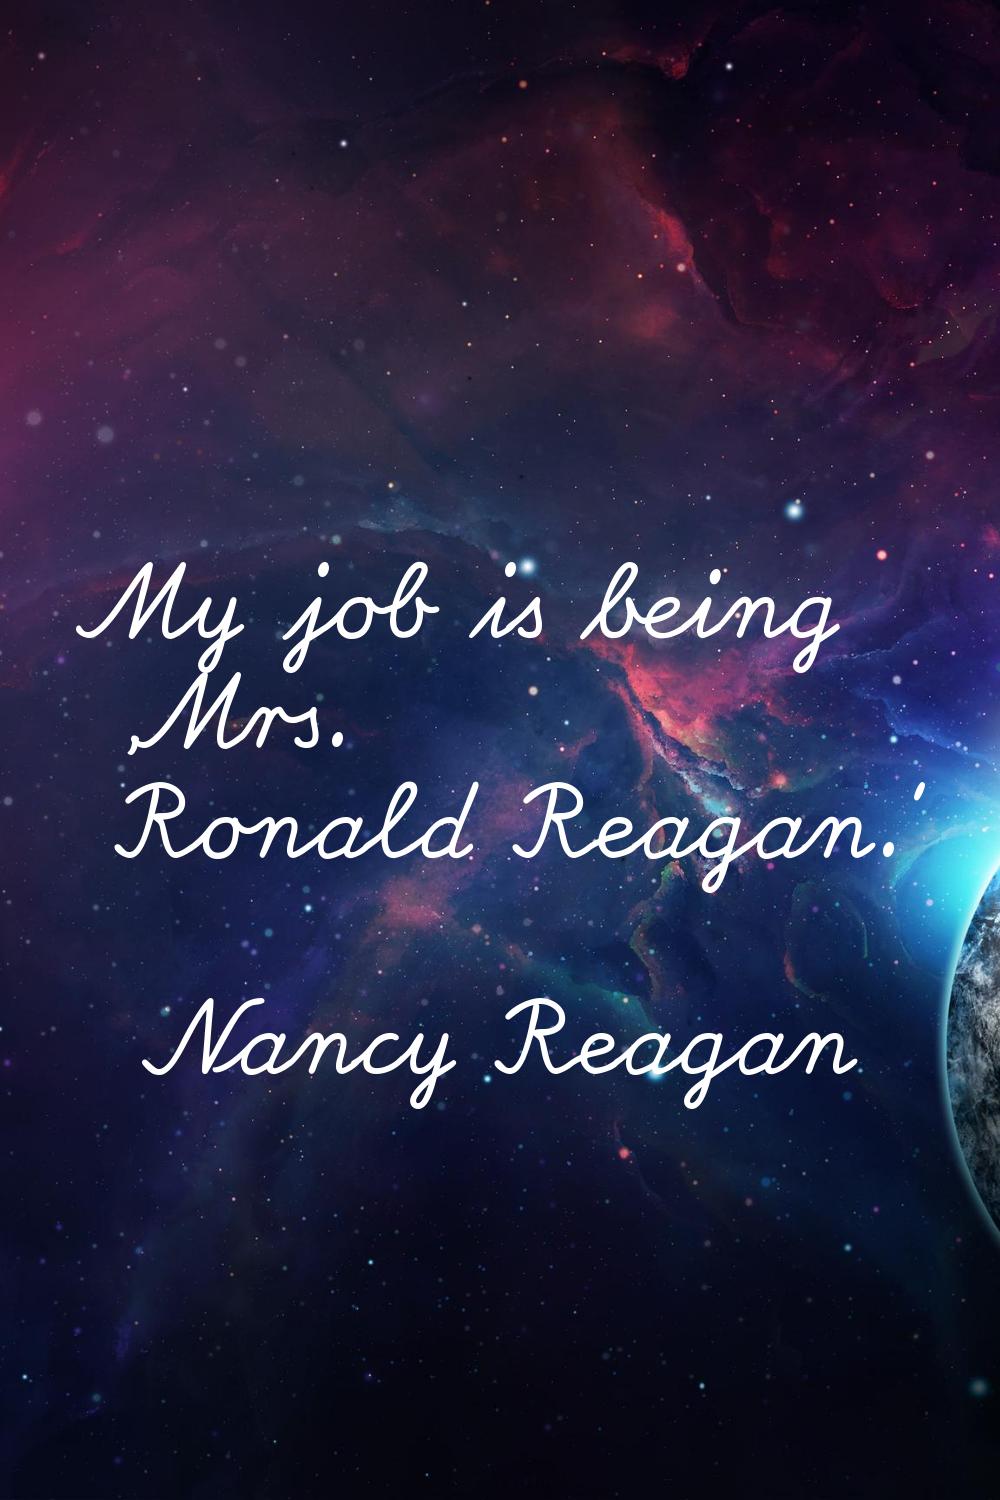 My job is being 'Mrs. Ronald Reagan.'